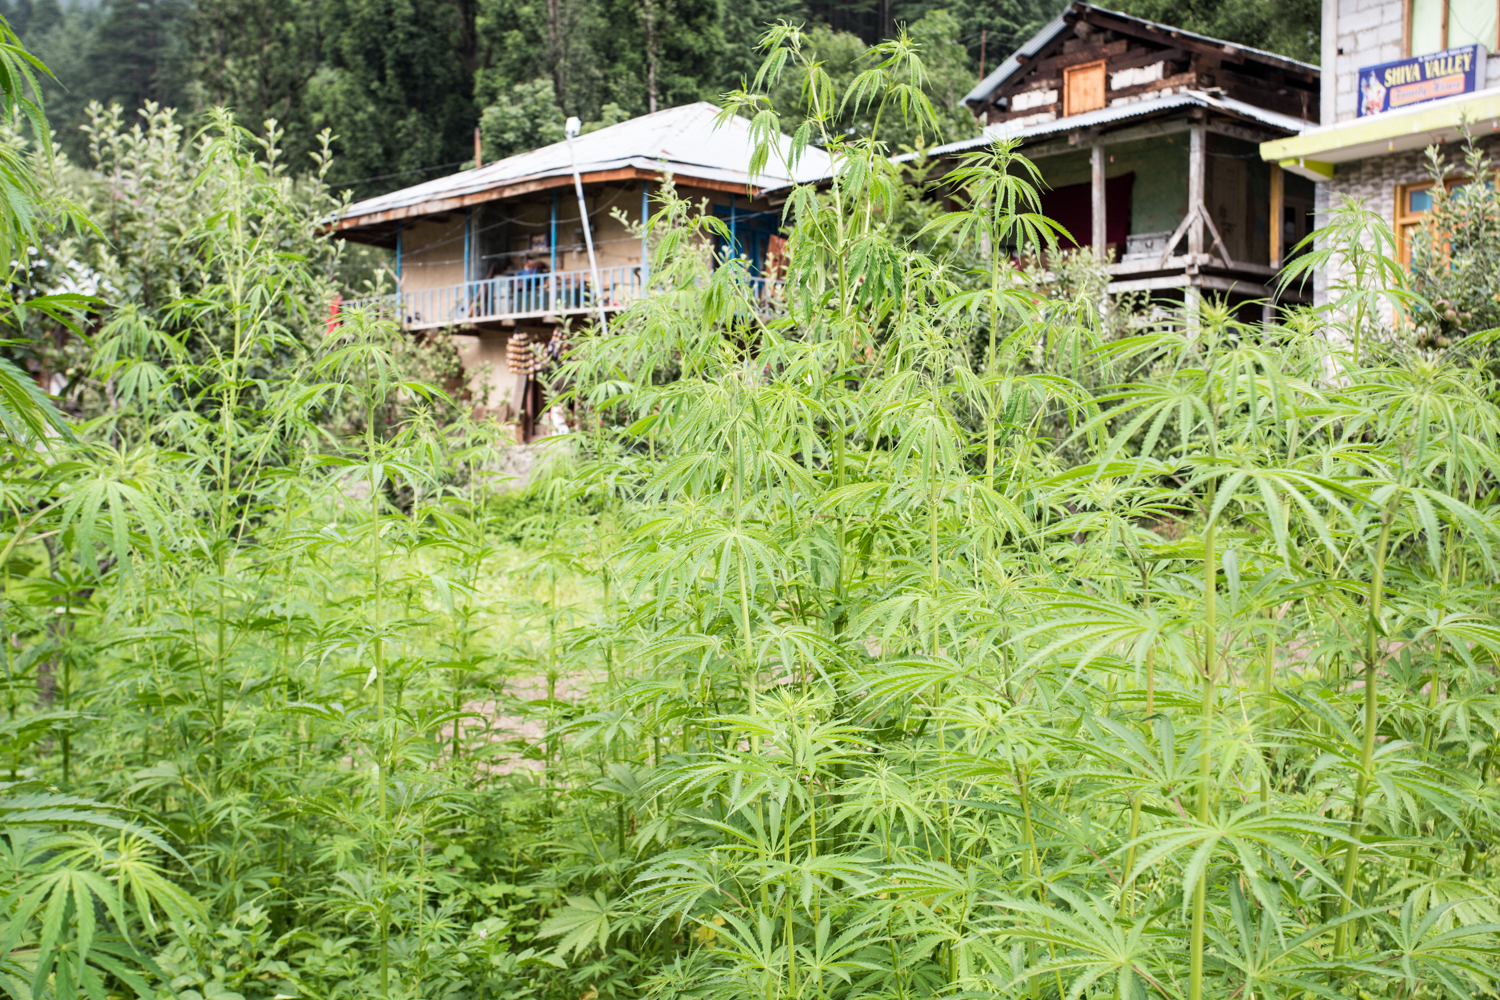  Marijuana plants growing adjacent guesthouses in Pulgar. Hashish, or "charas", as it &nbsp;known locally, is a major cash crop for farmers of the region.&nbsp; 